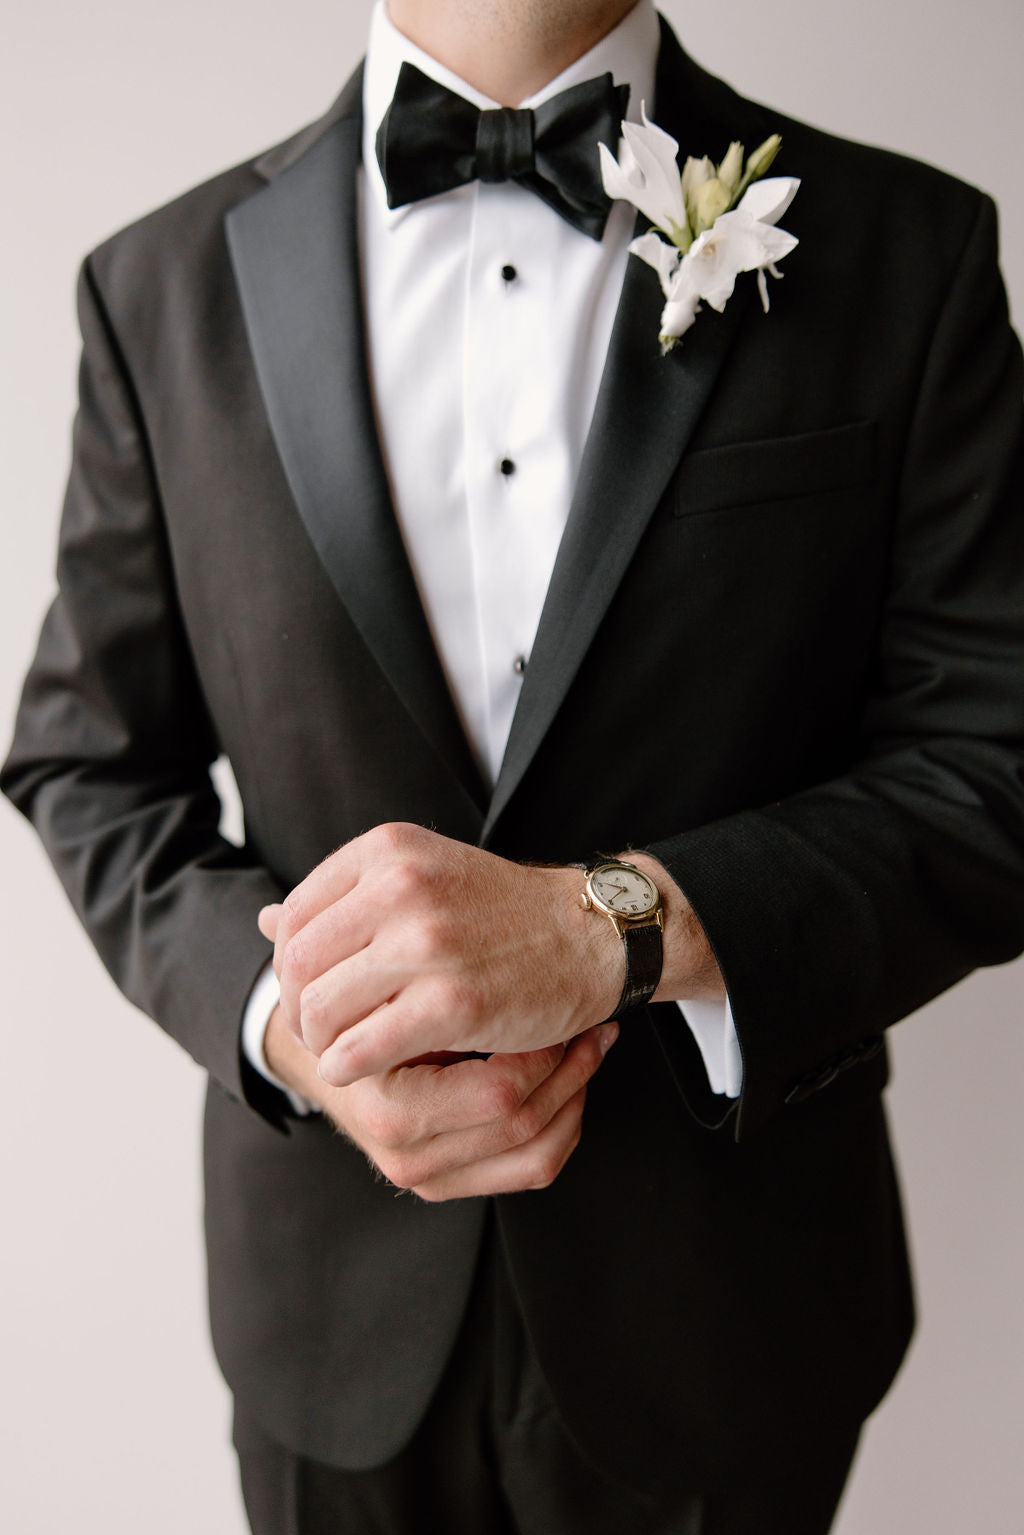 Boutonniere on groom by Earth and Thorn floral studio